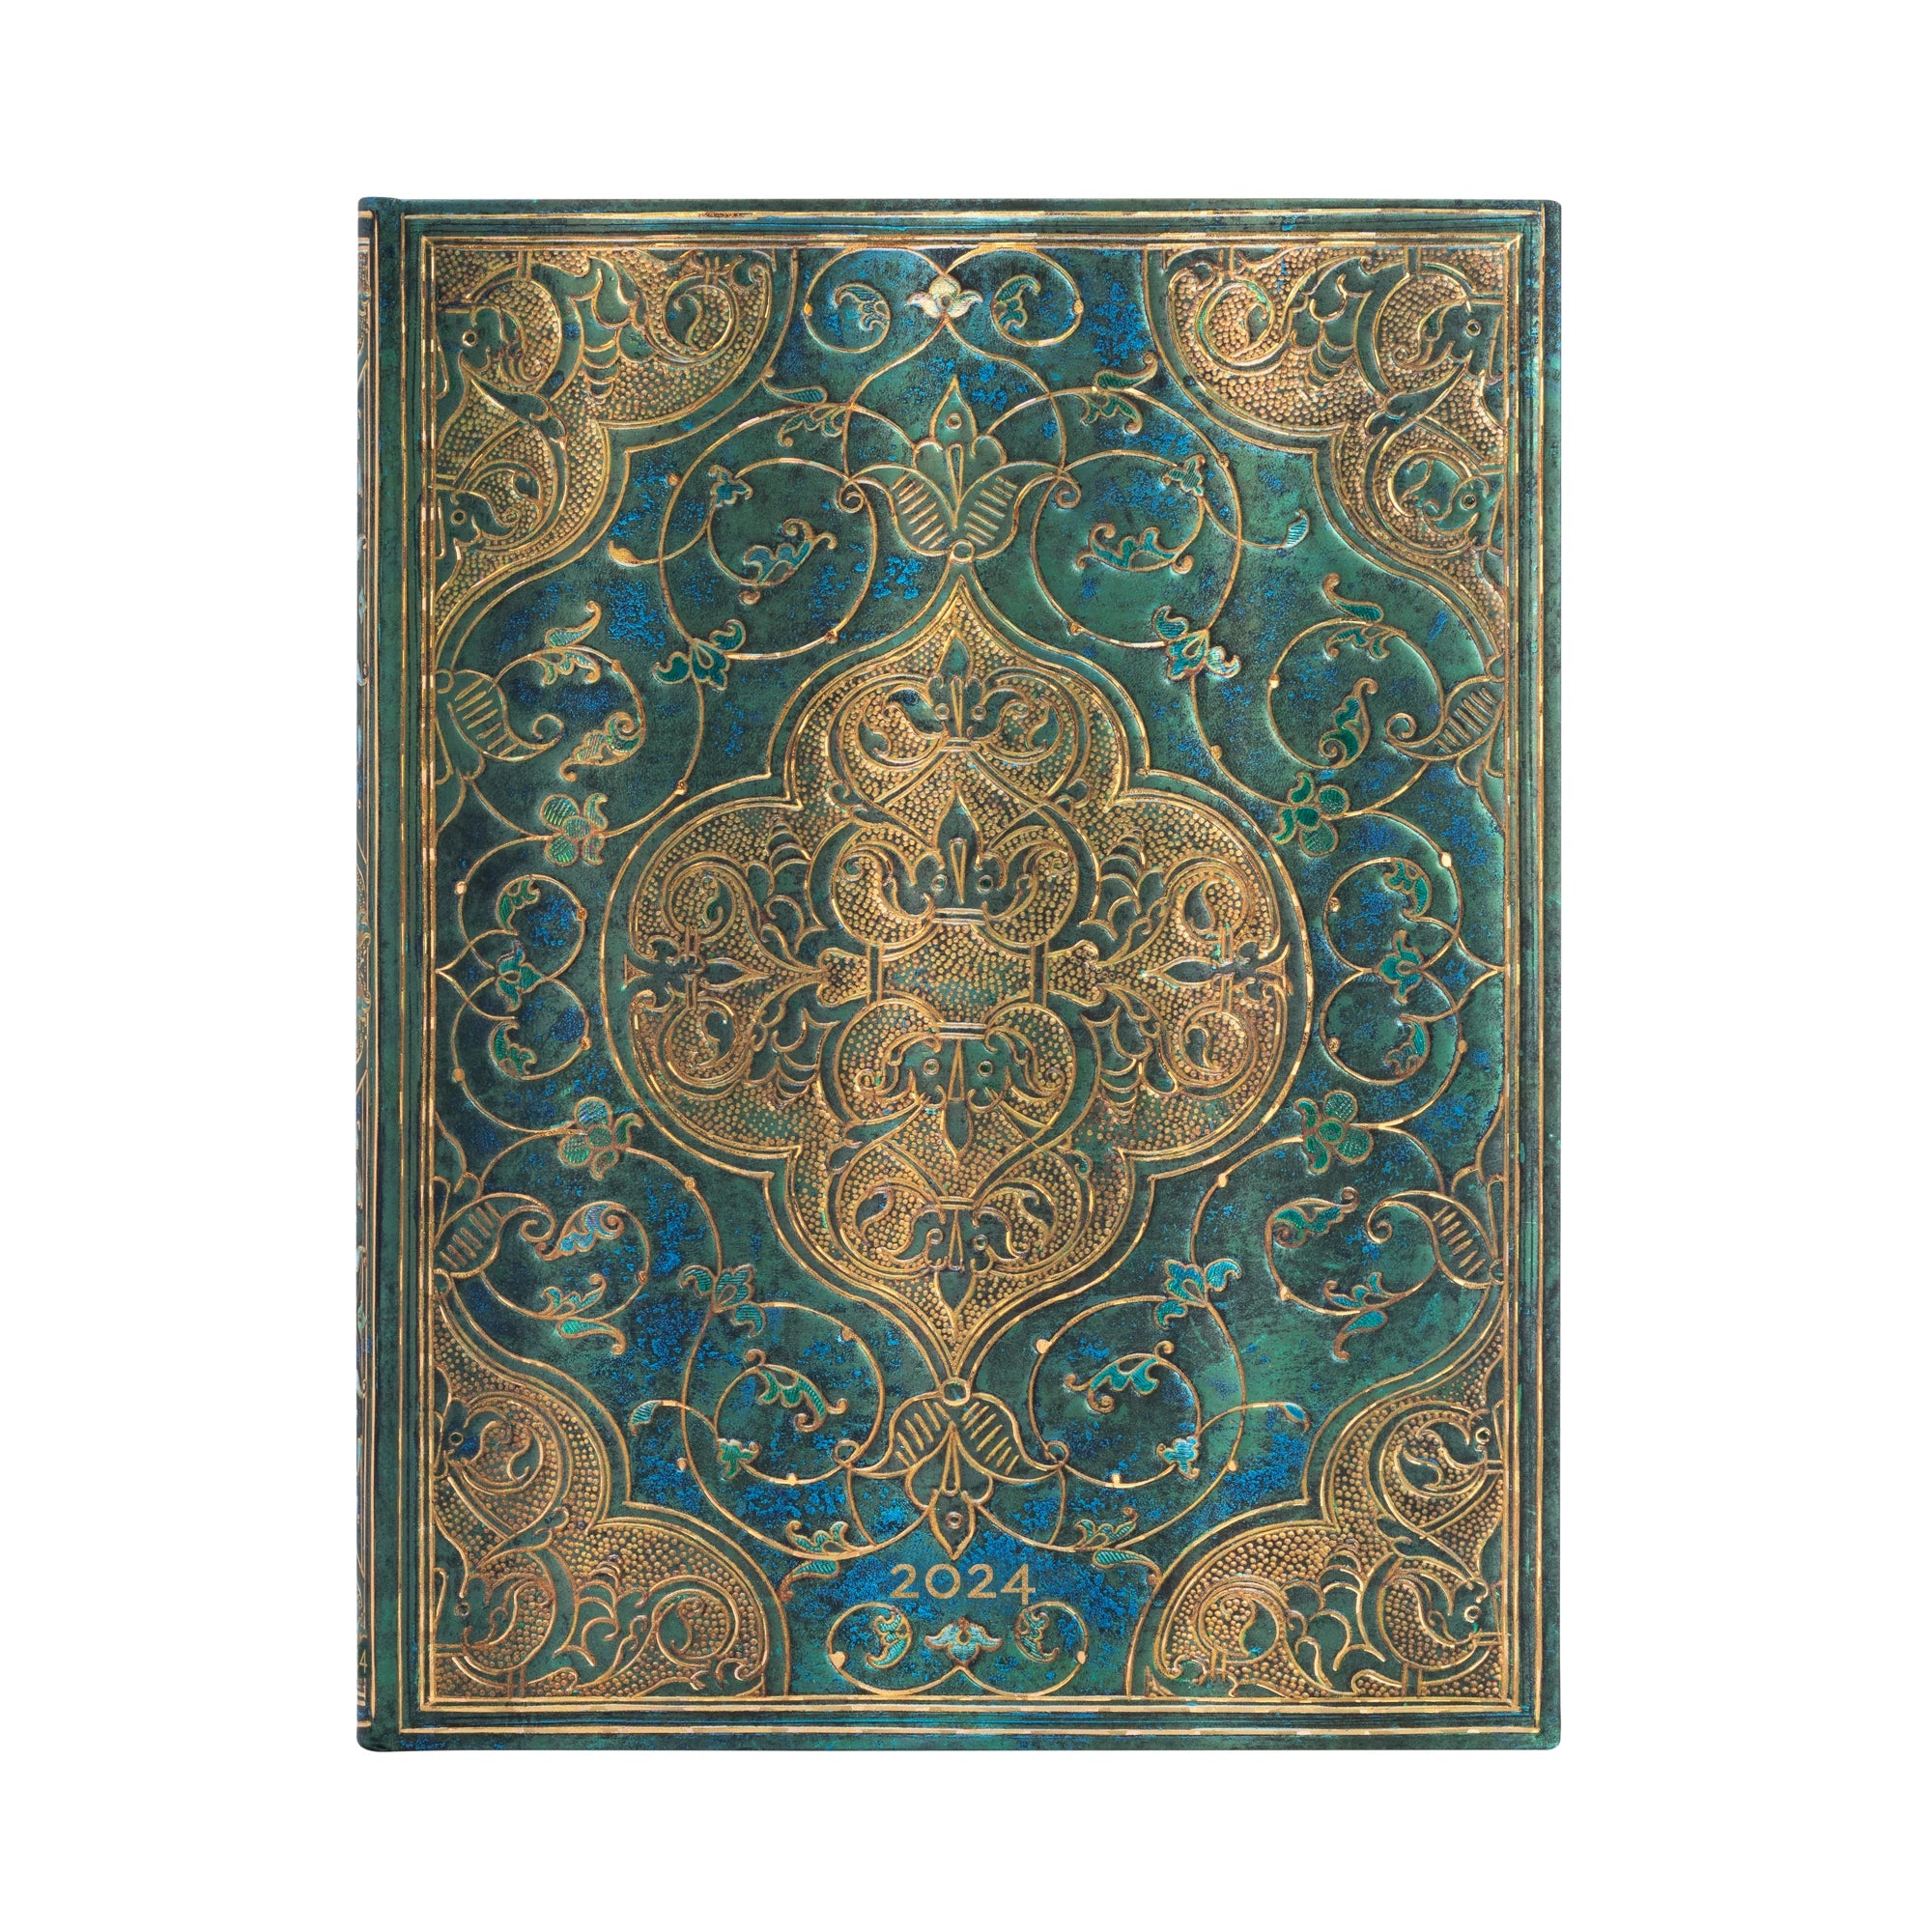 Paperblanks 2024 diary hardcover Turquoise Chronicles